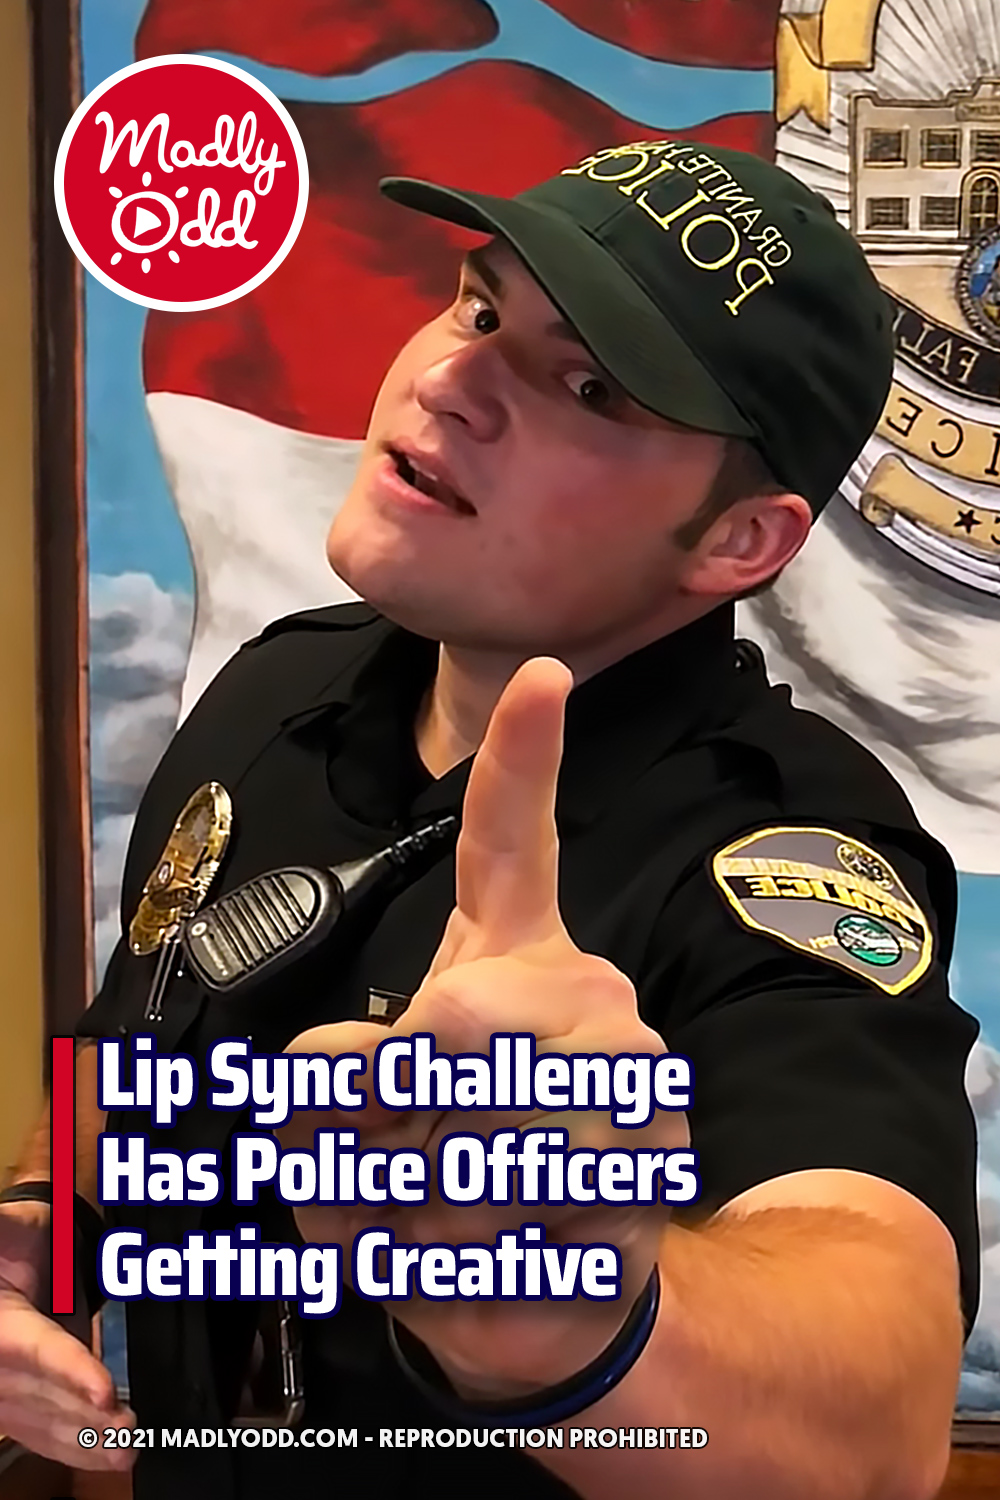 Lip Sync Challenge Has Police Officers Getting Creative